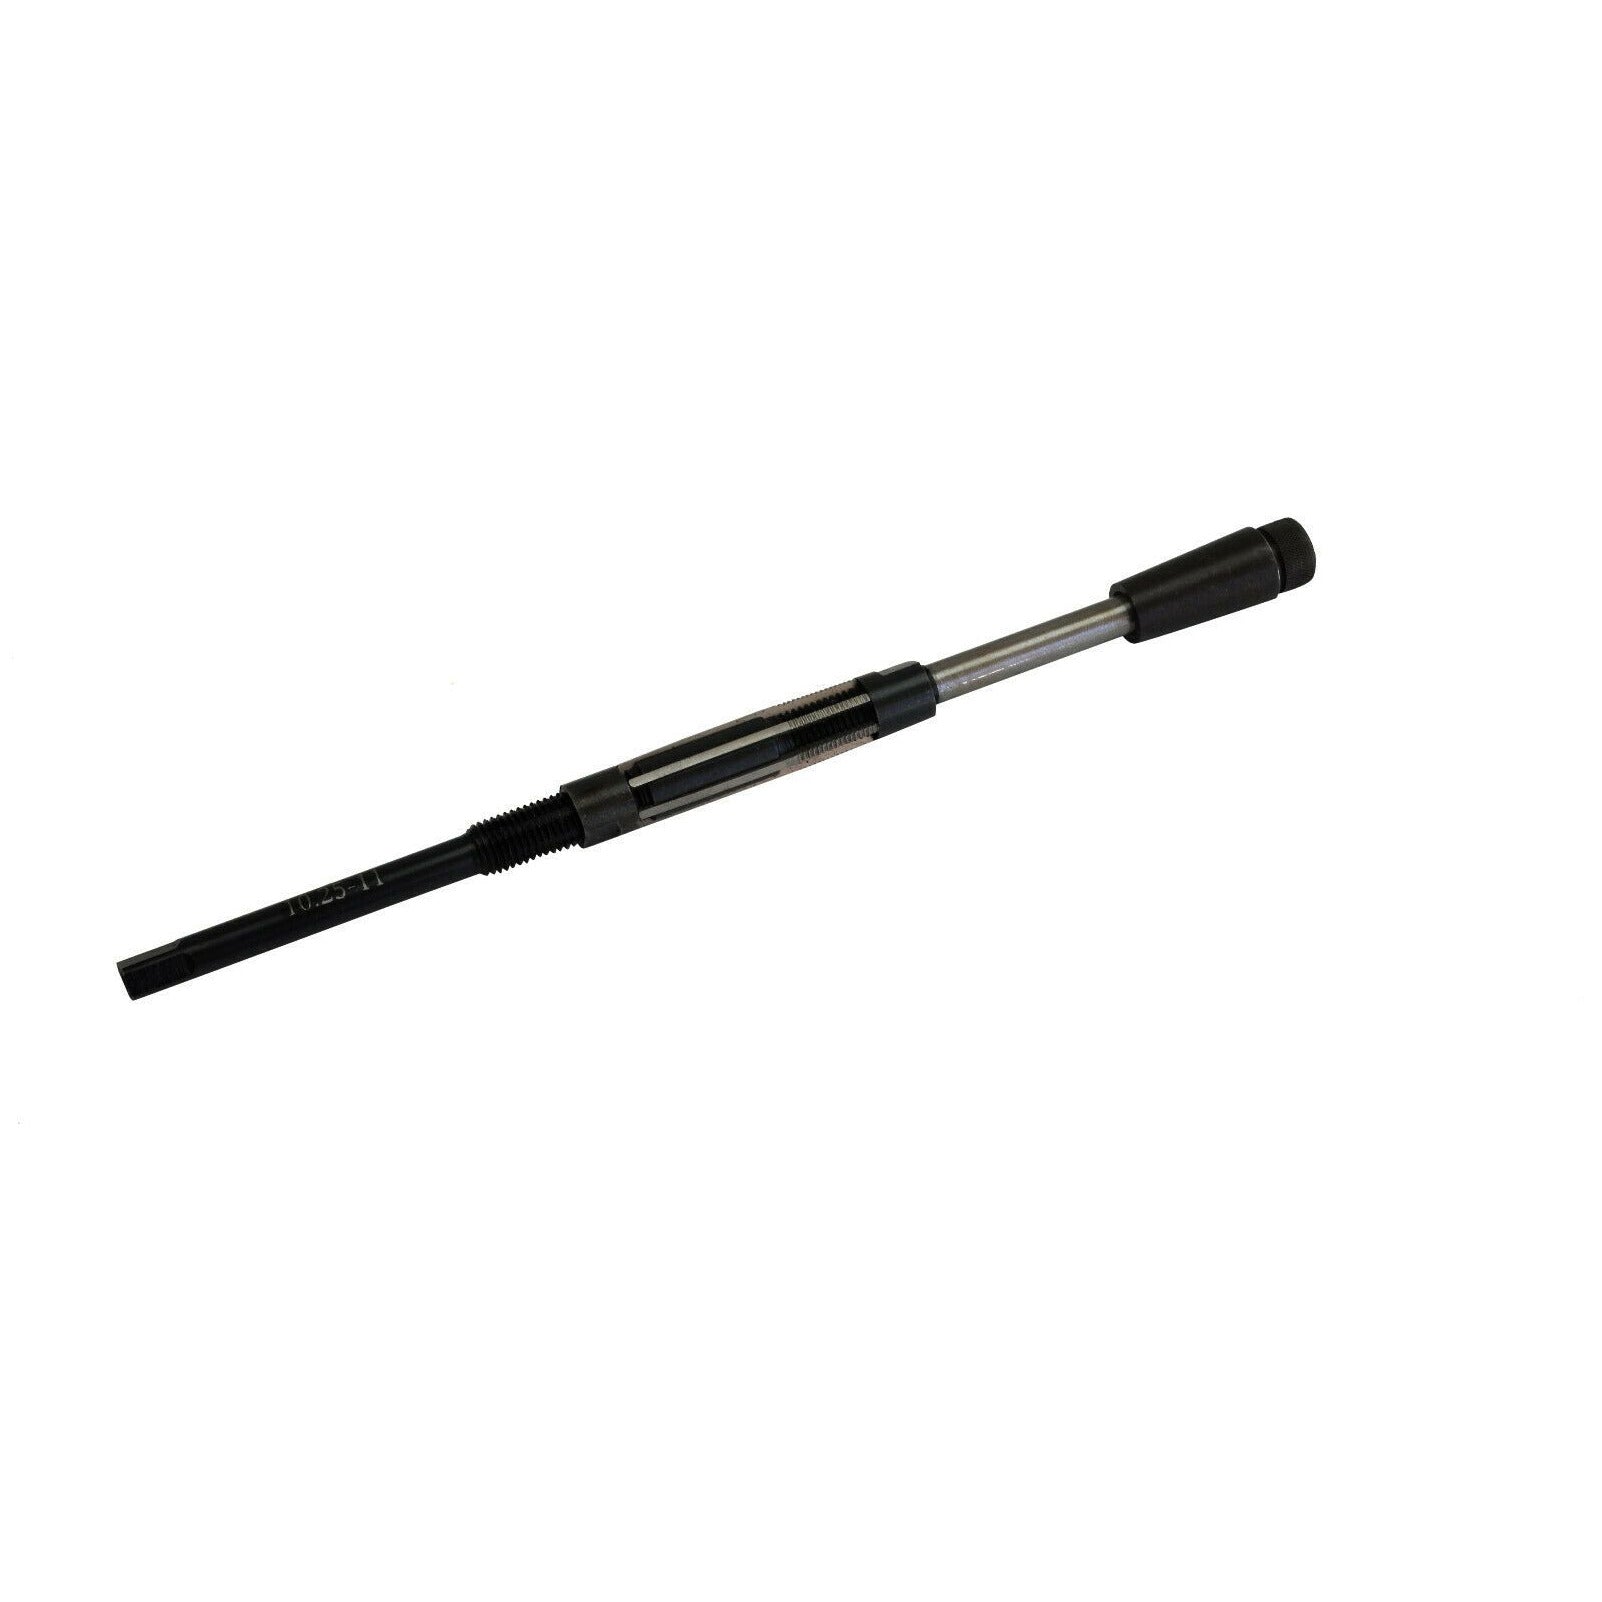 10.25 -11 mm Adjustable Hand Reamer with Guide